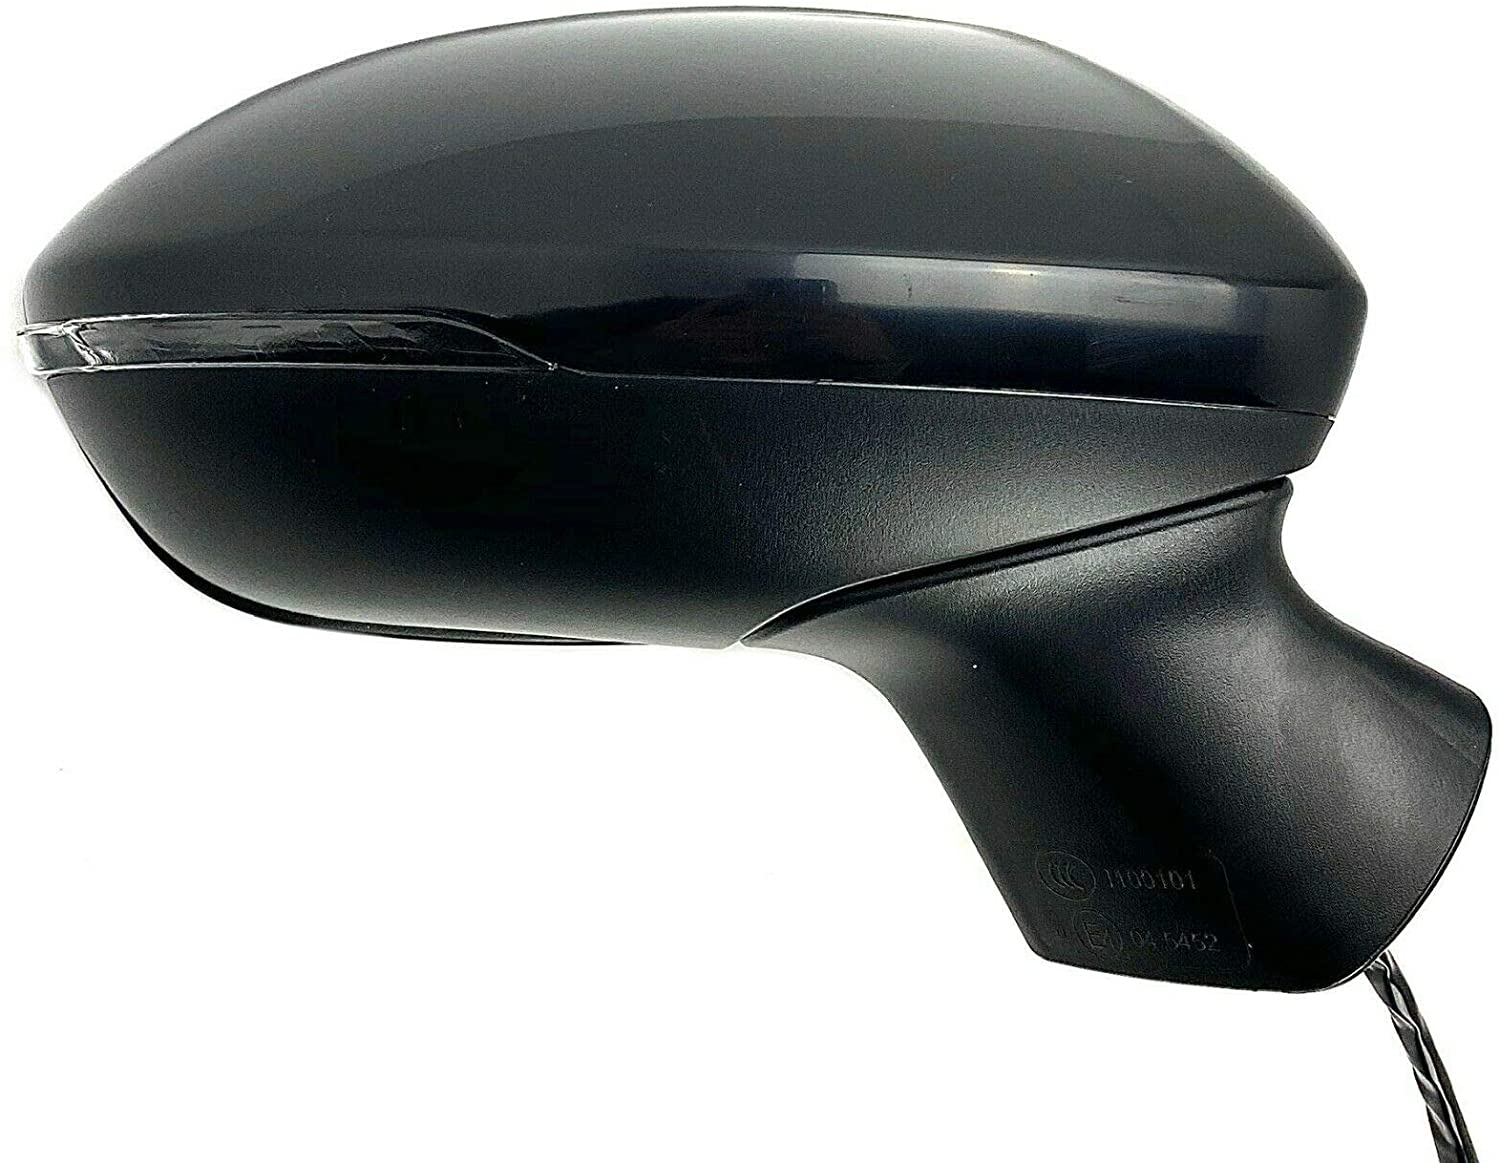 Aftermarket MIRRORS for CHEVROLET - CRUZE, CRUZE,16-19,RT Mirror outside rear view